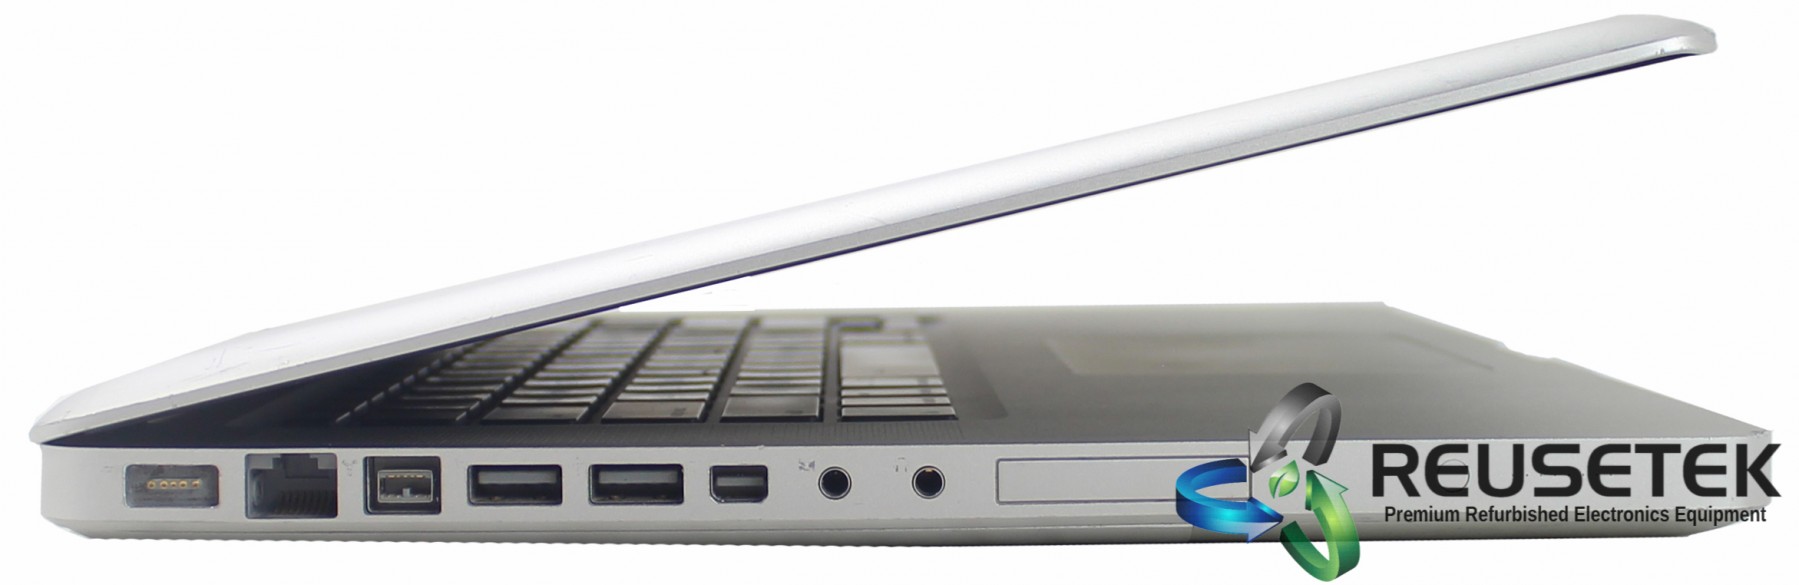 AMPA1286-Apple MacBook Pro 15" A1286 2.53GHz Core 2 Duo 4GB RAM 320GB HDD 10.11 Late 2008-image